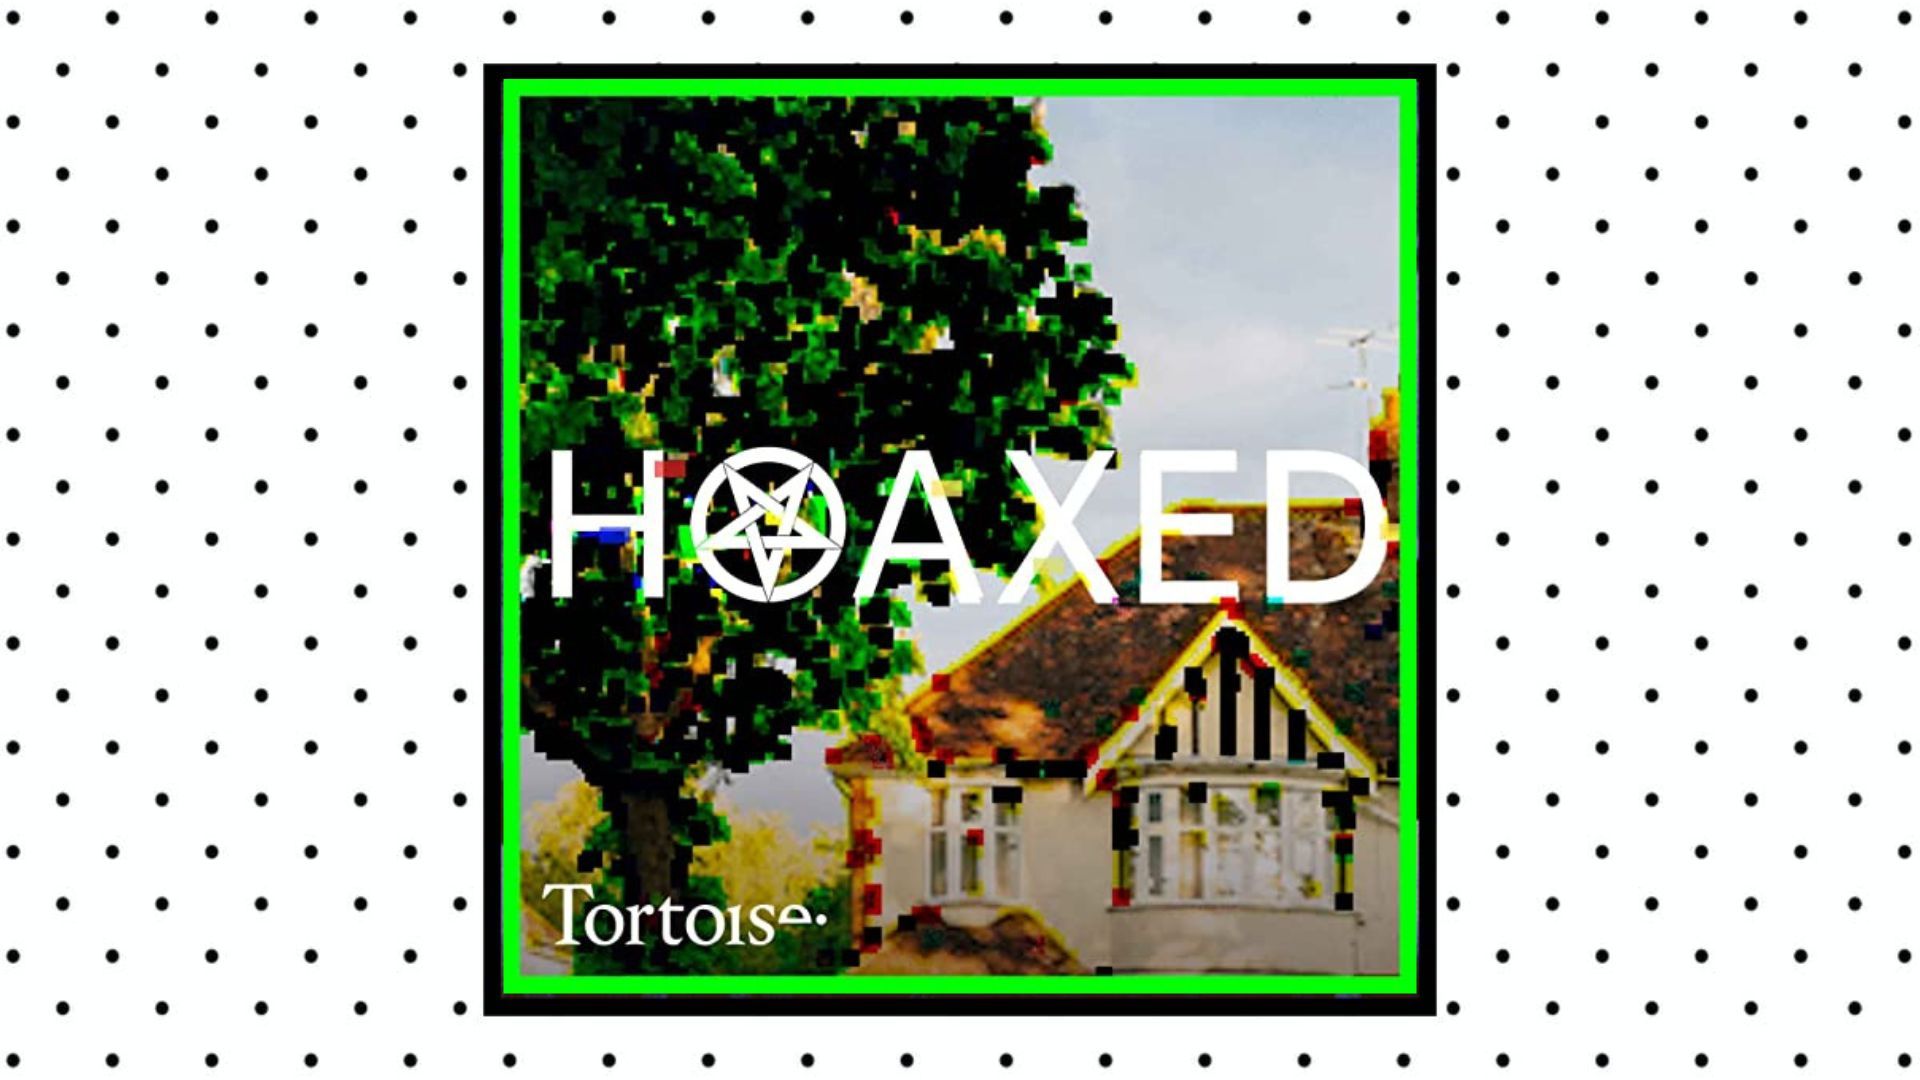 Hoaxed is the wild new conspiracy theory podcast on your radar